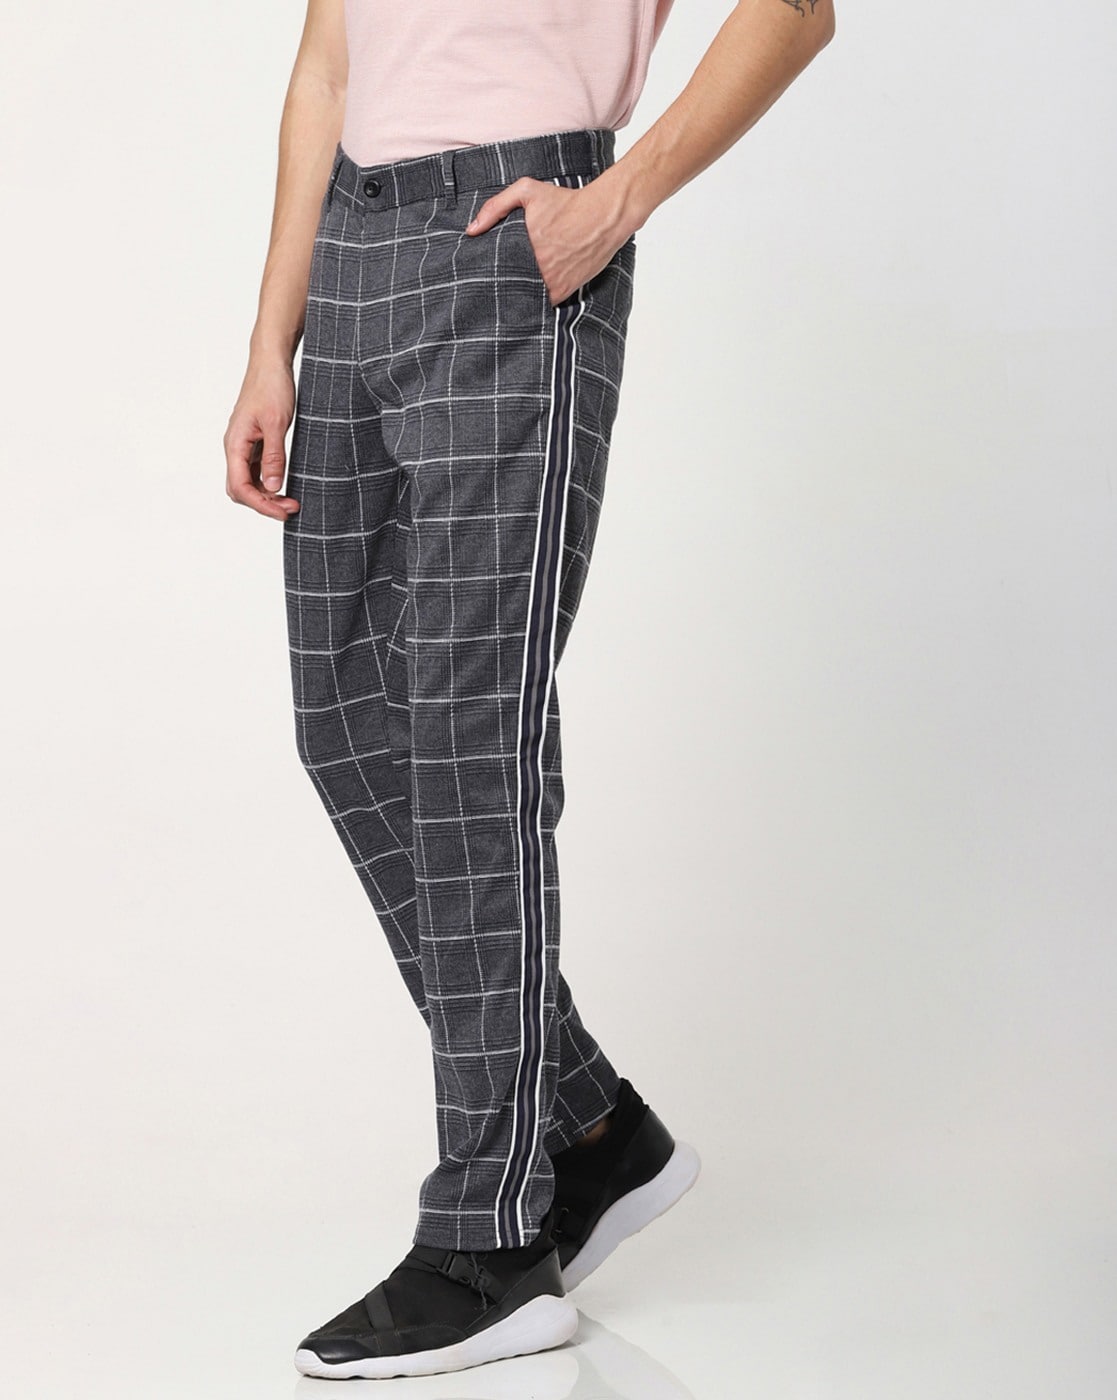 Men Slim Fit Plaid Printed Checkered Pants Stretch Casual Work Business  Trousers - Walmart.com